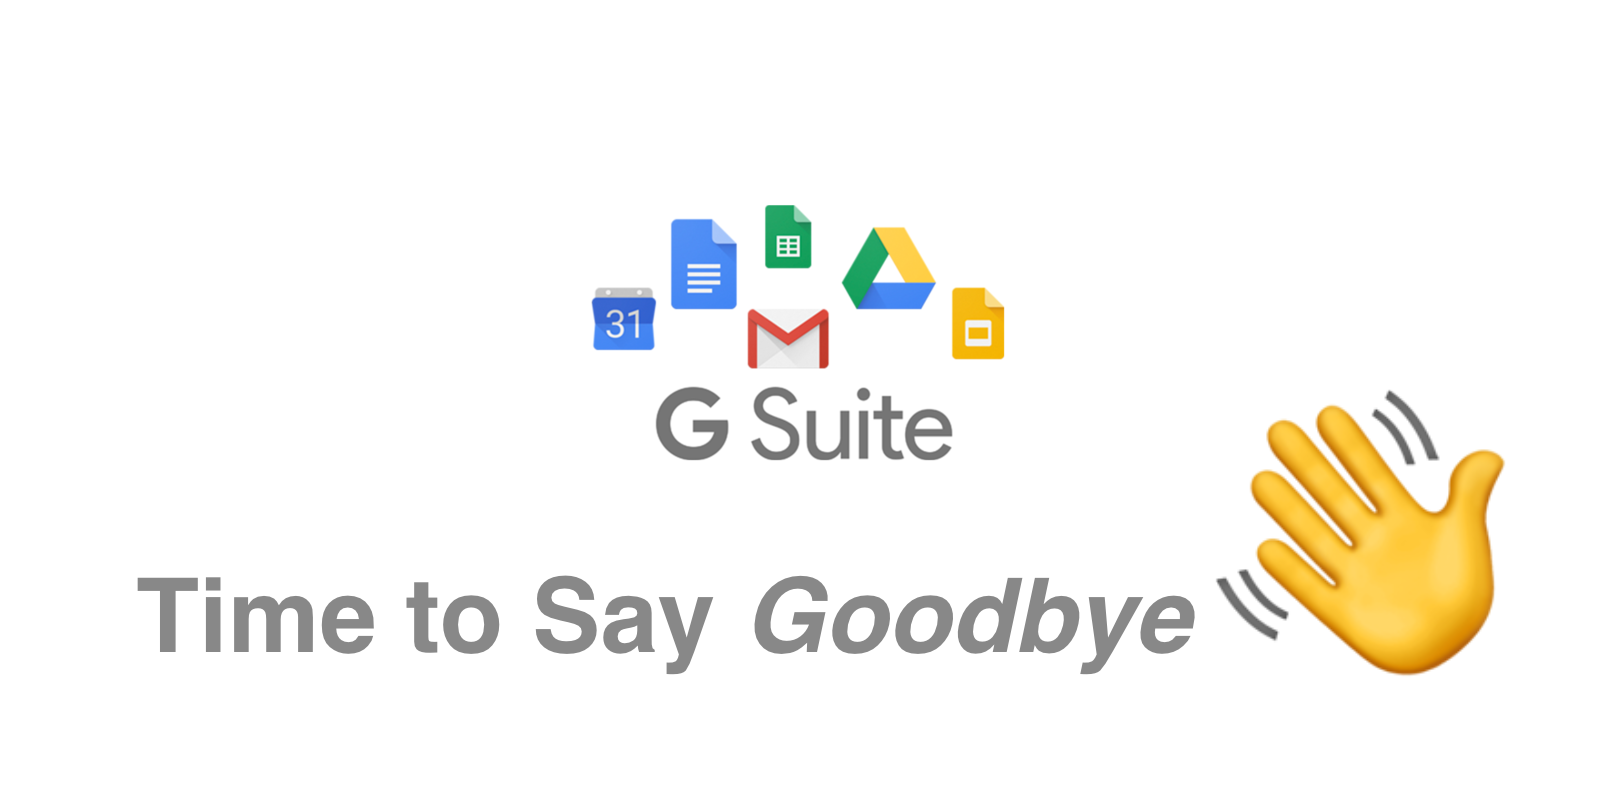 A picture with a waving hand emoji, to demonstrate saying goodbye to Google G suite services.